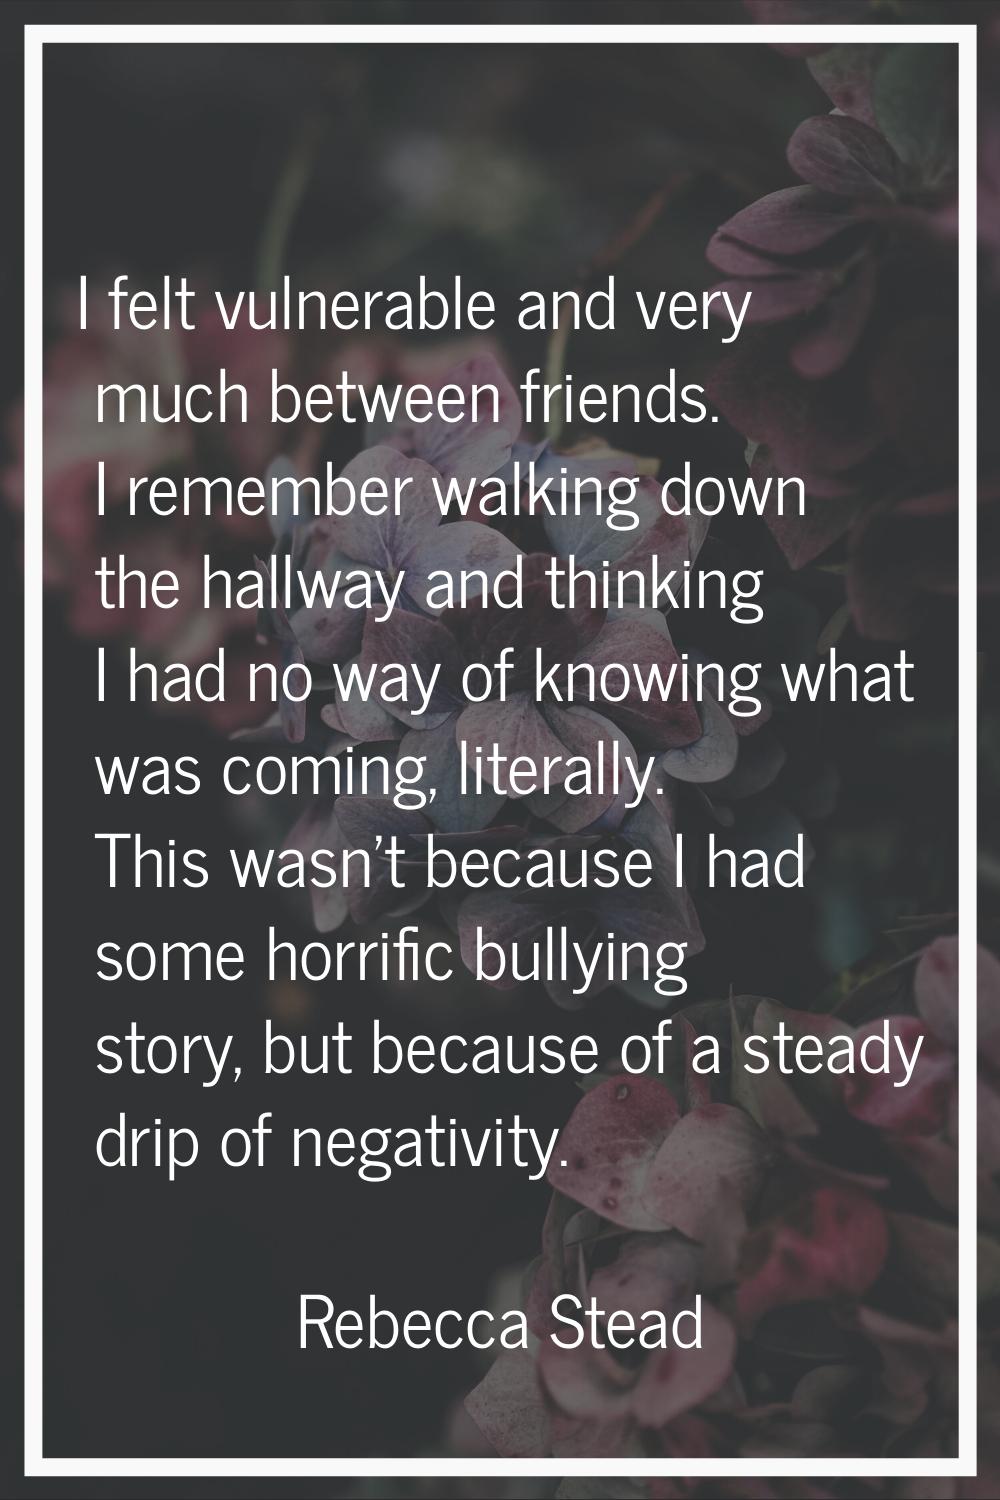 I felt vulnerable and very much between friends. I remember walking down the hallway and thinking I